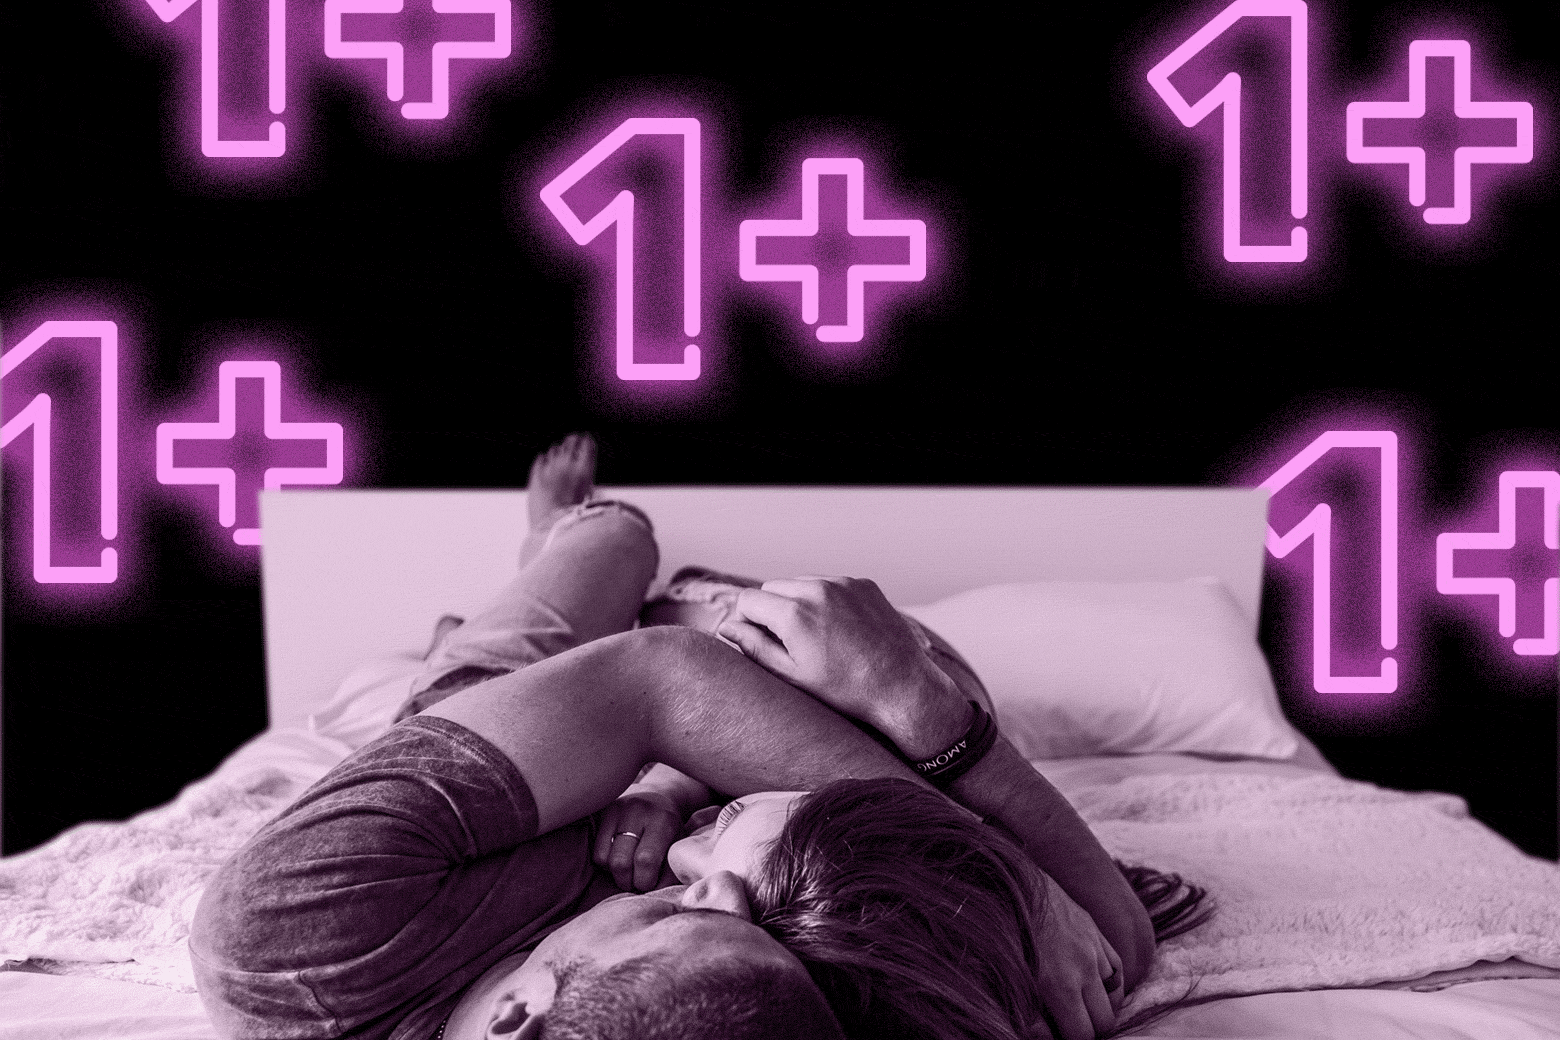 My husband wants to watch me have sex